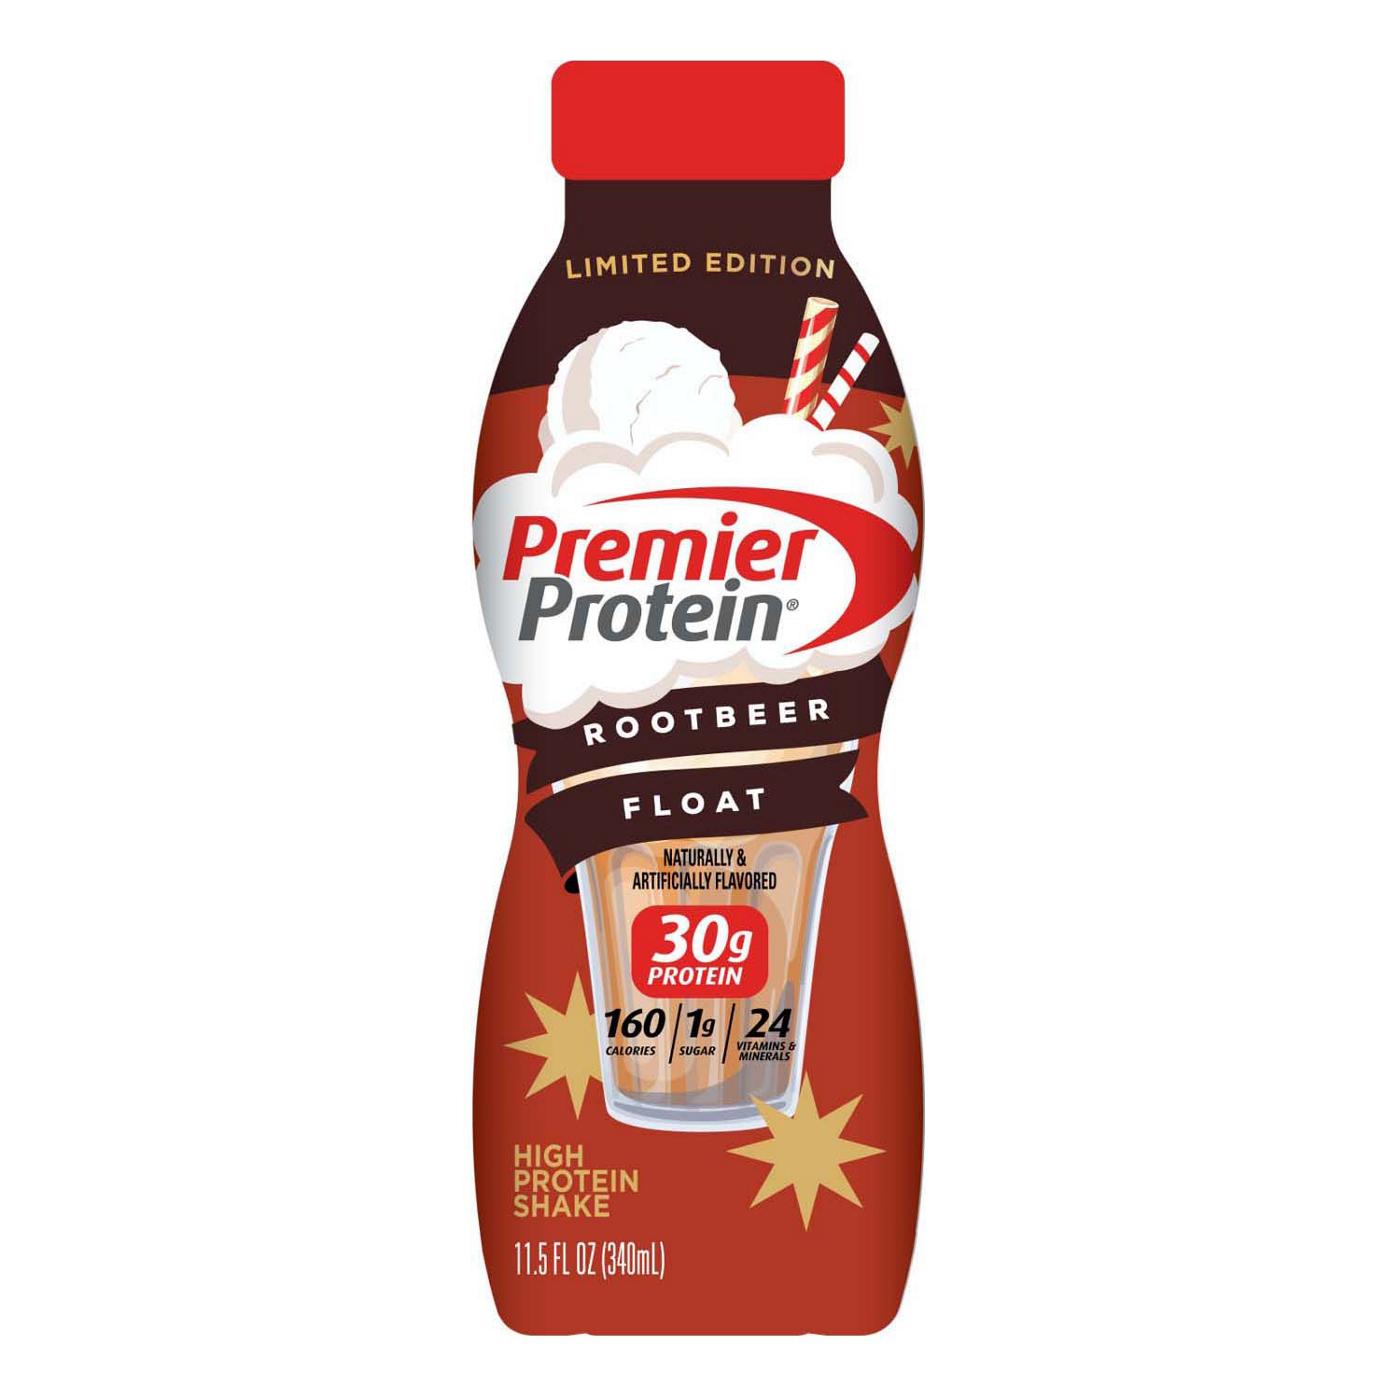 Premier Protein Root Beer Float Protein Shake; image 1 of 4